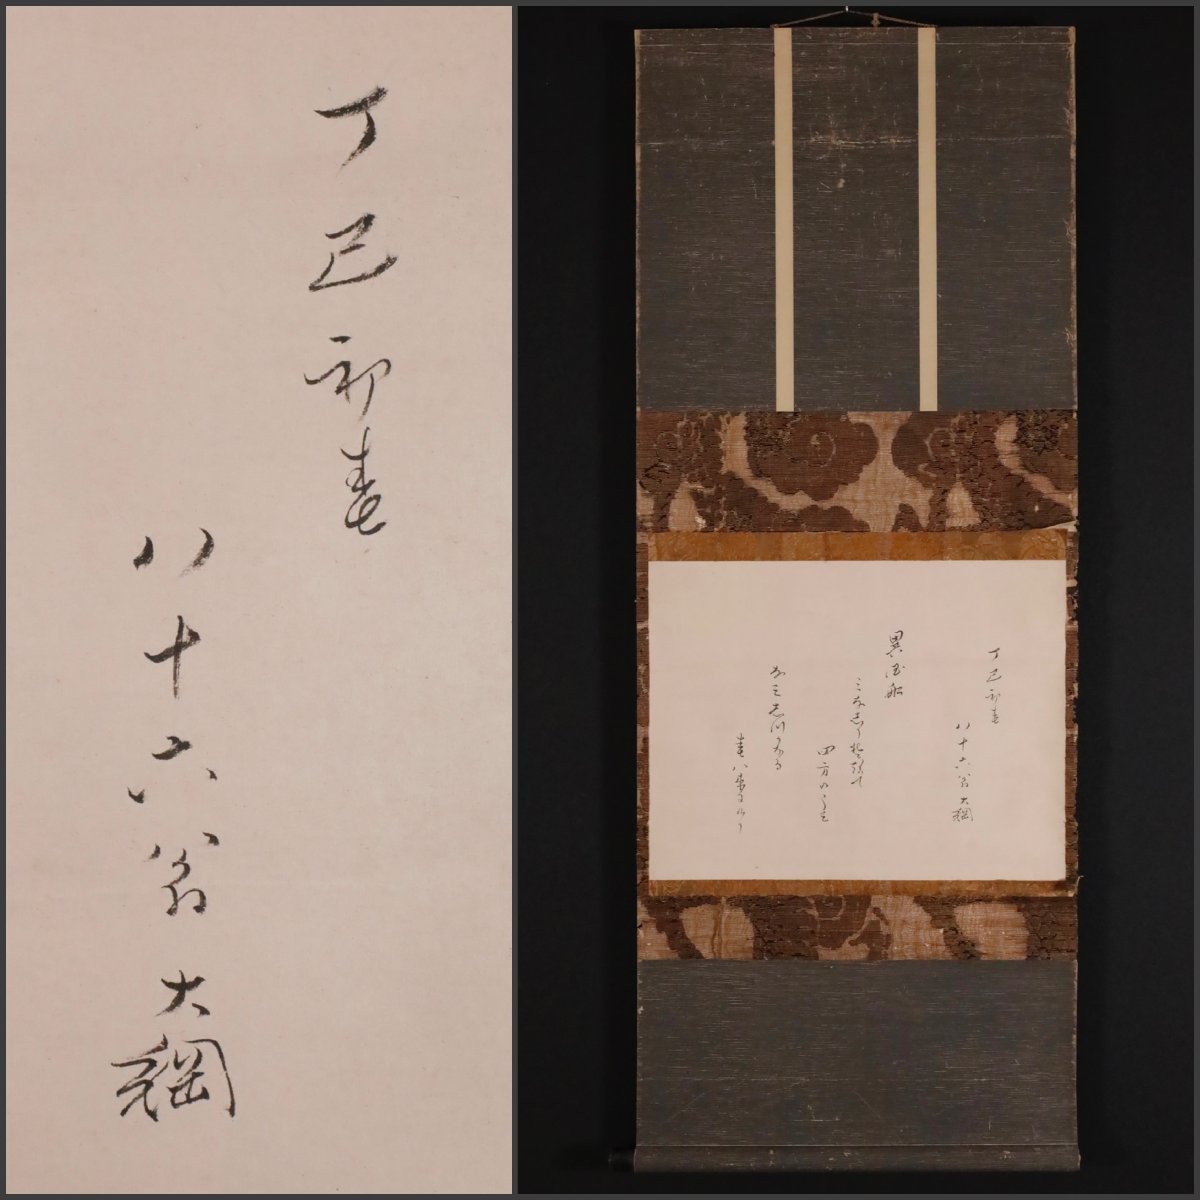 [ copy ].]9824 large ... Waka hour representative .. settled . large virtue temple ... head yellow plum . Buddhism tea .. tea utensils paper table equipment hanging scroll .. axis antique goods 